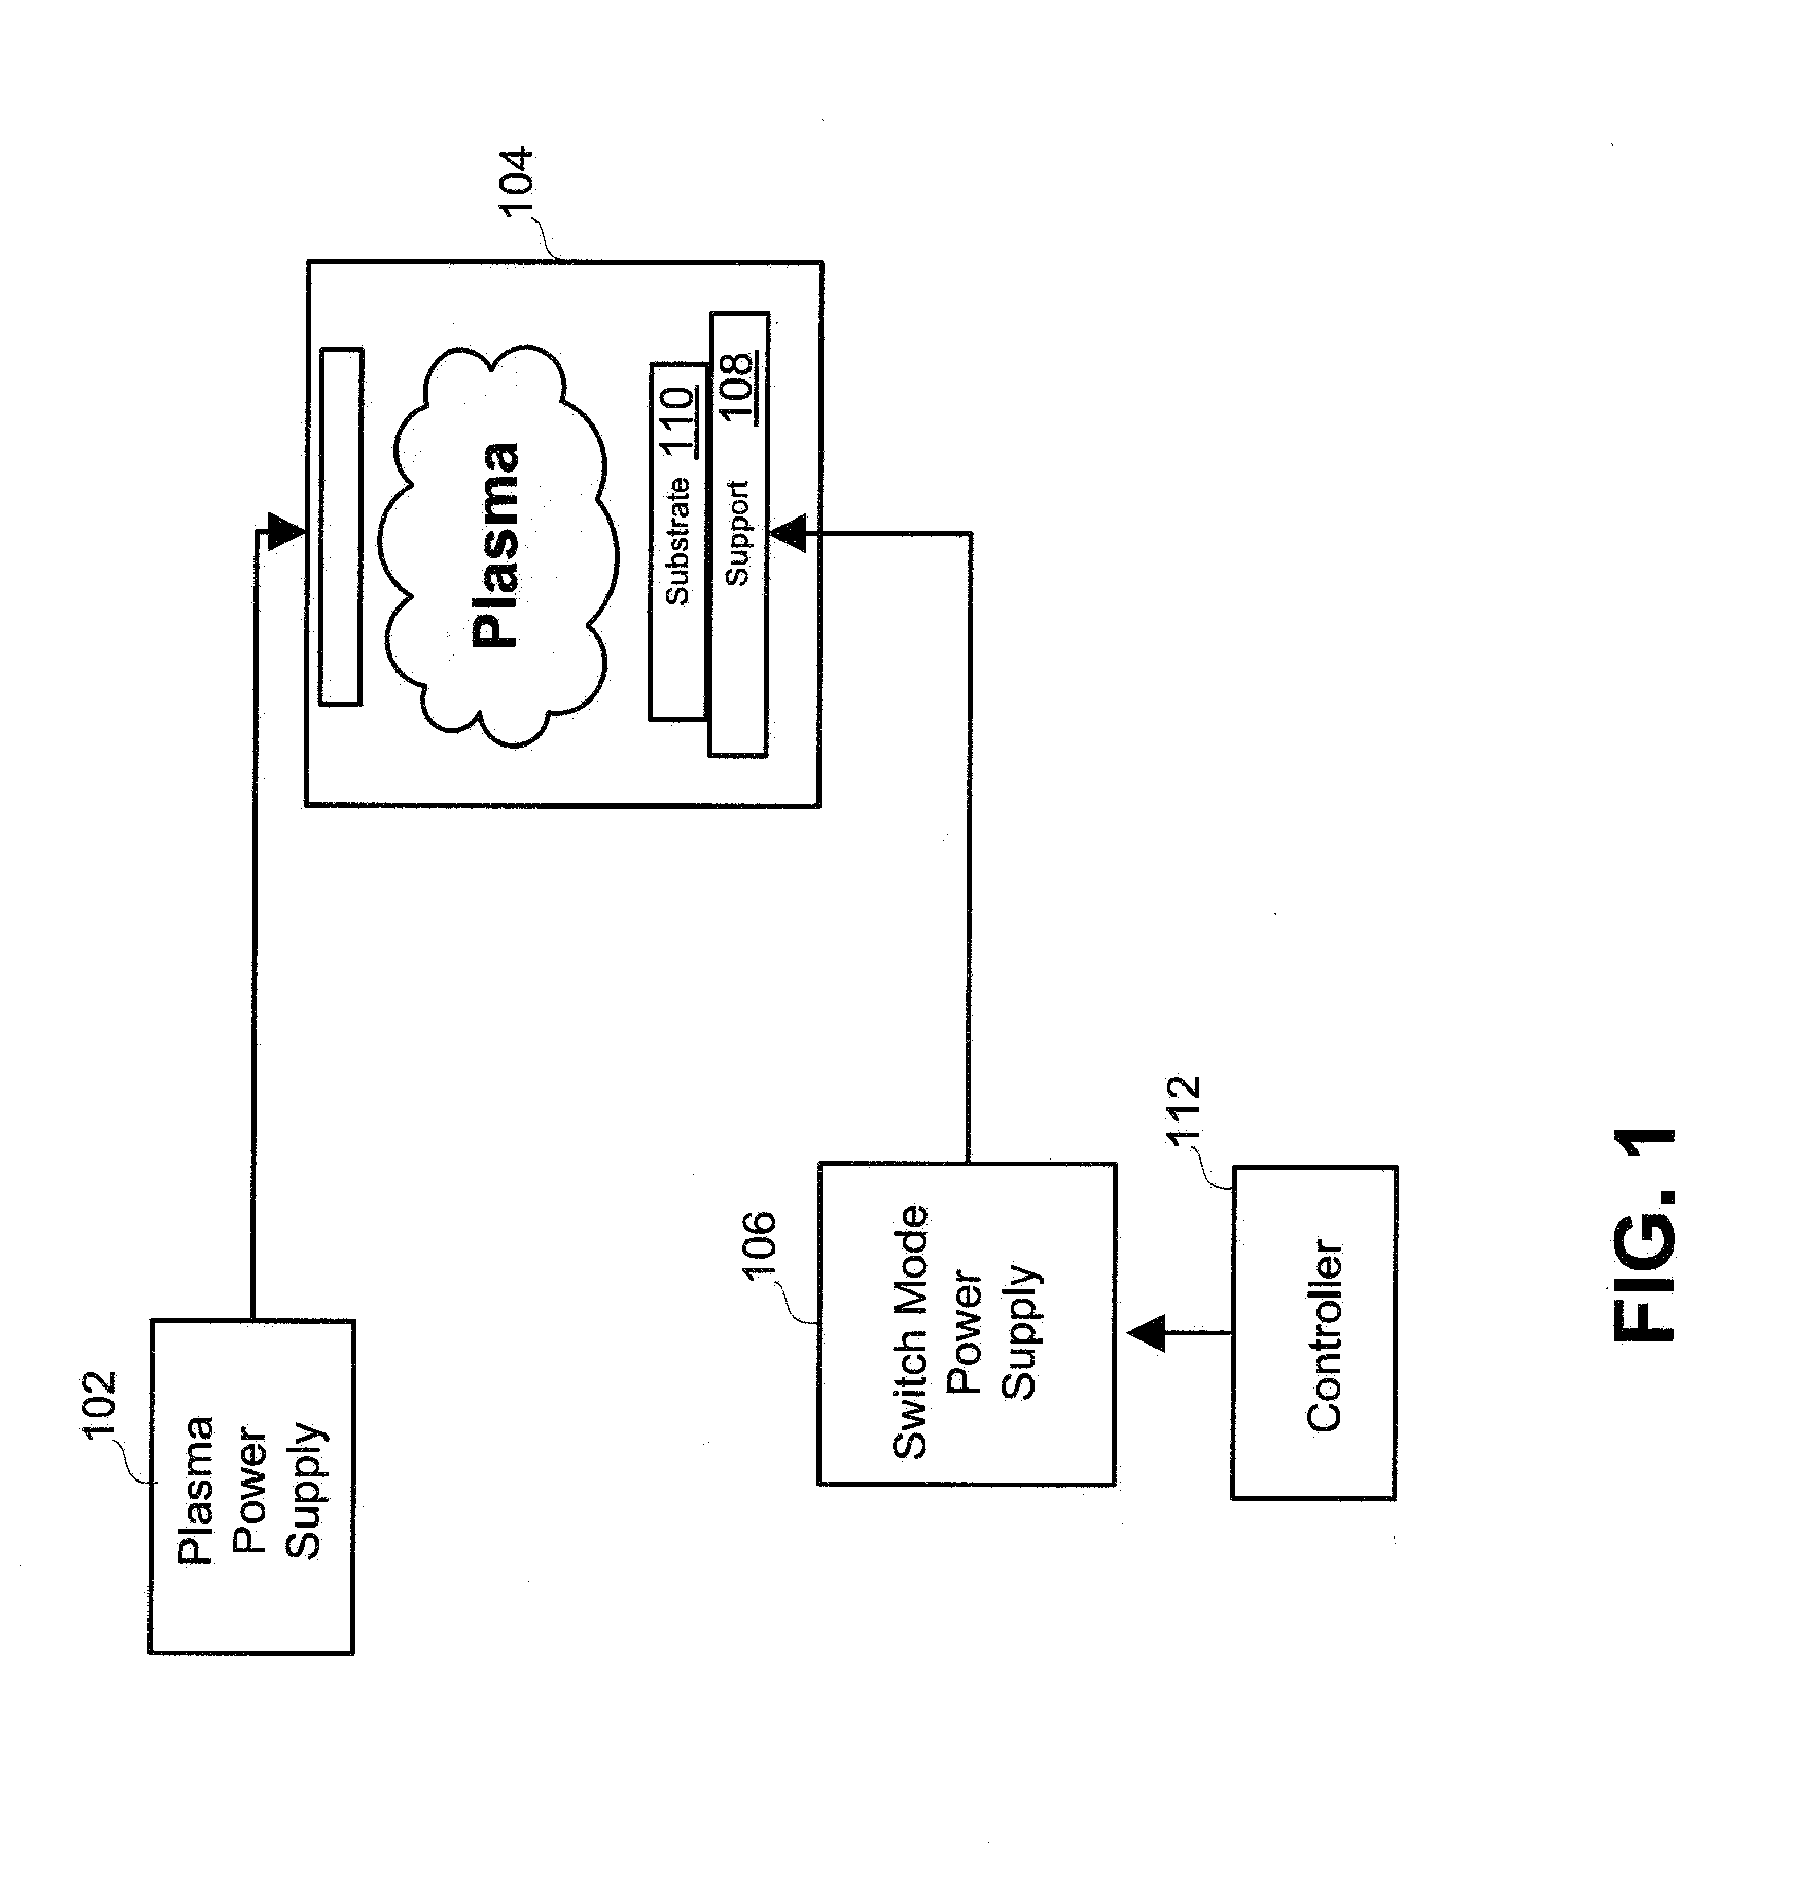 Method of controlling the switched mode ion energy distribution system